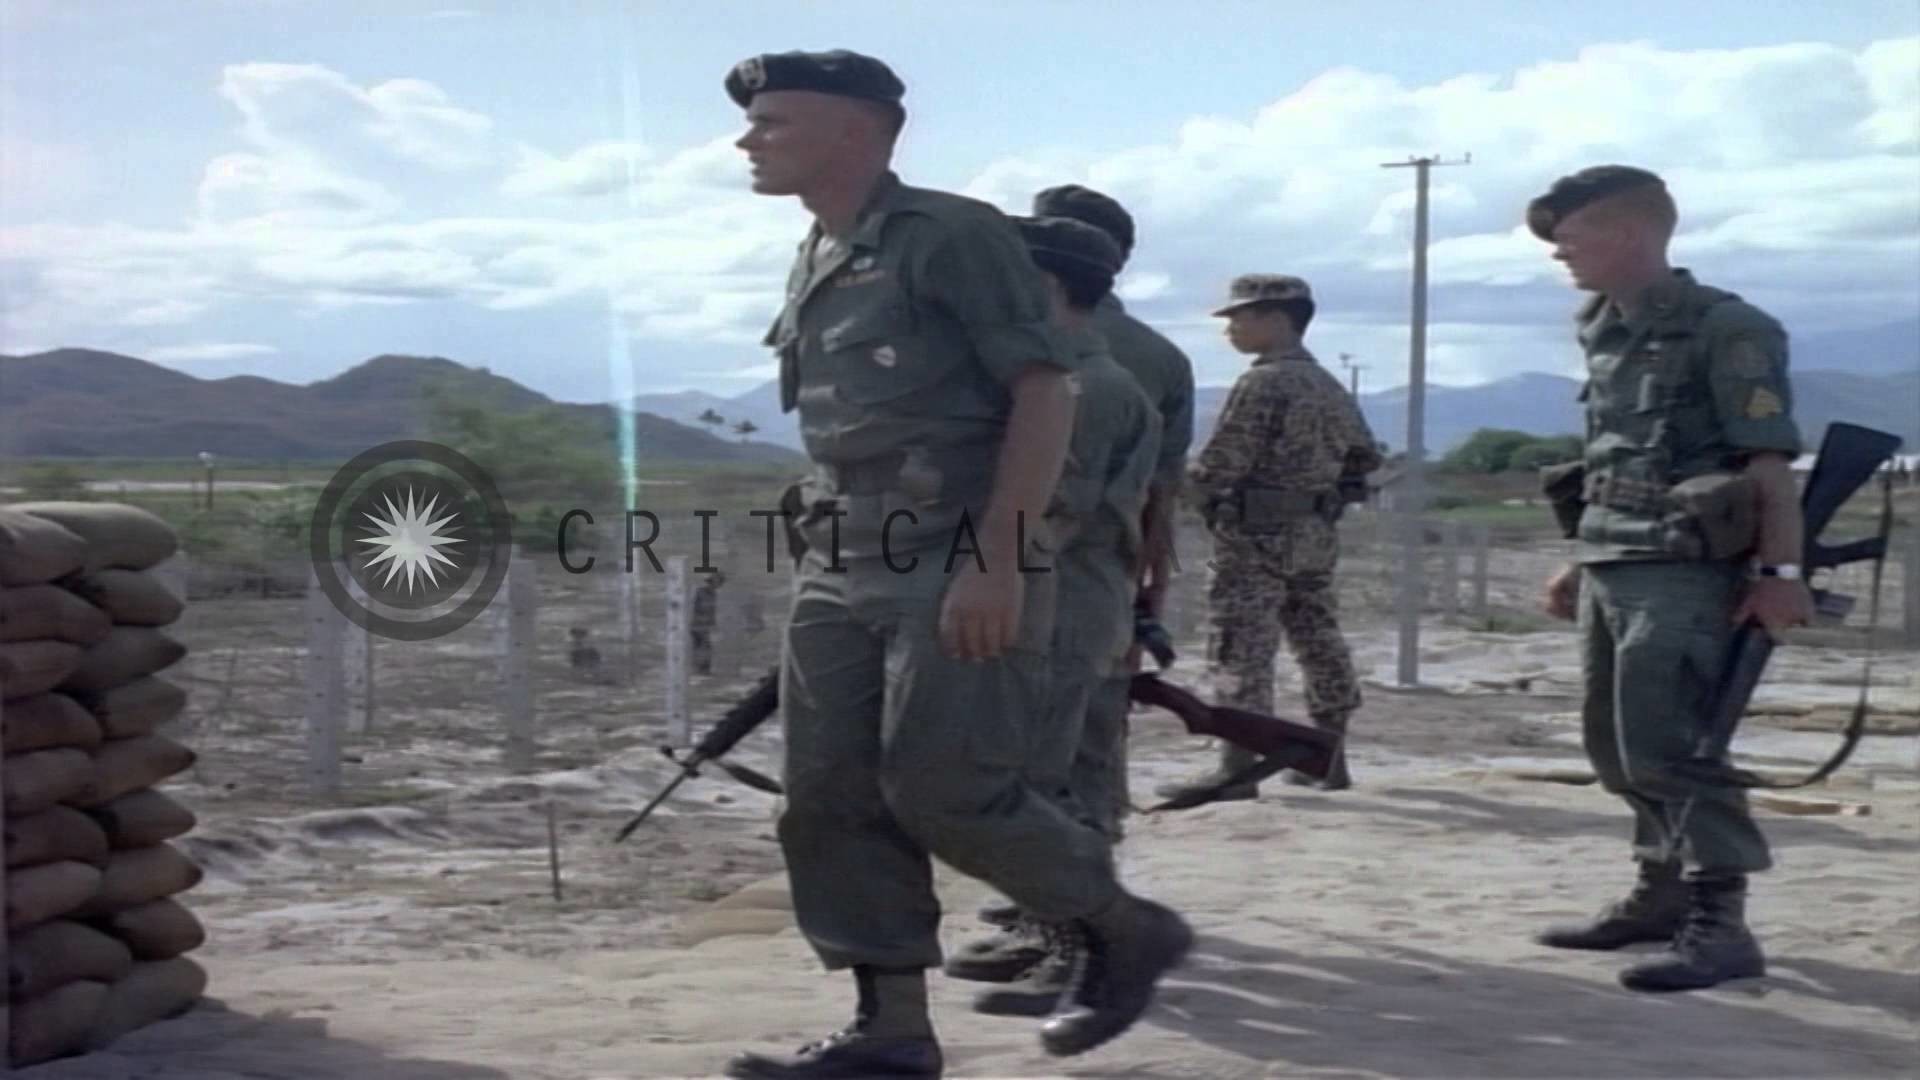 1920x1080 US Army Special Forces officers and Vietnamese officers discuss near  sandbagged b...HD Stock Footage - YouTube